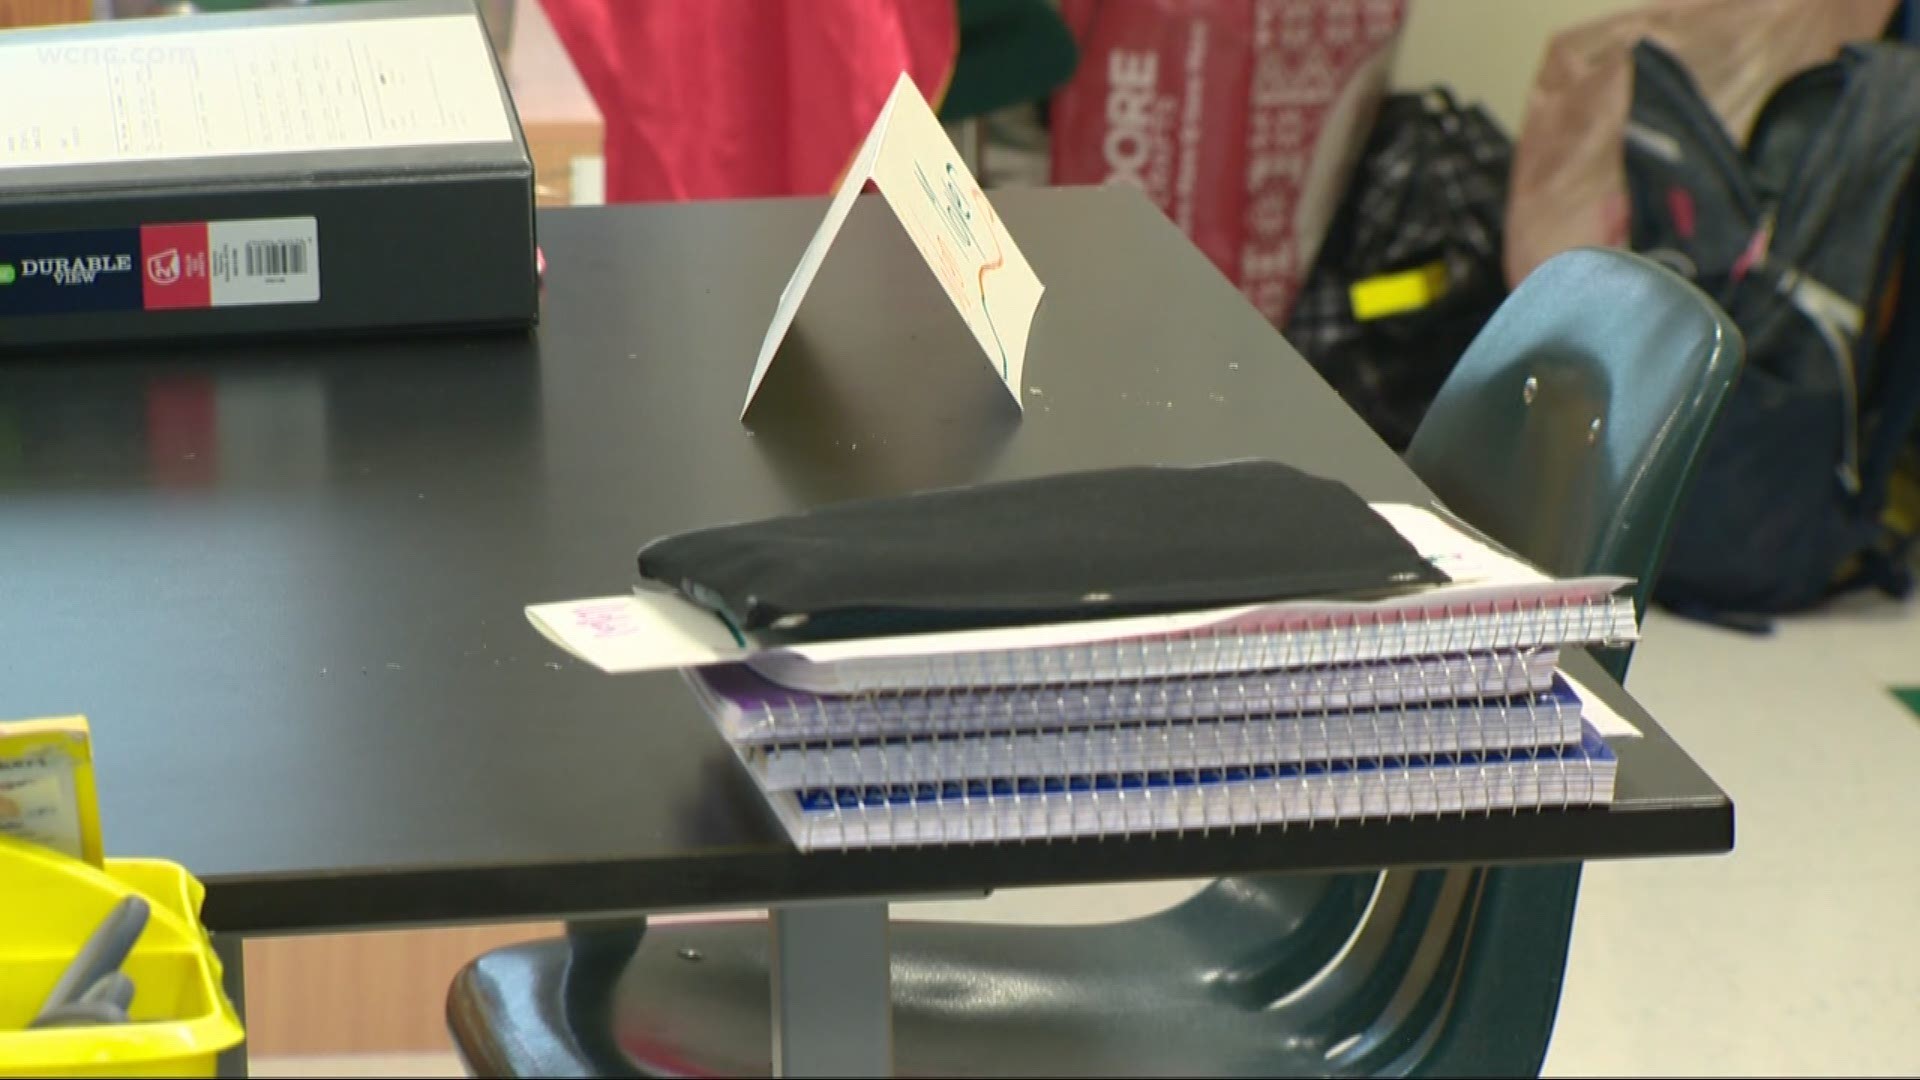 Some big changes could be coming to the calendar in one South Carolina school district.